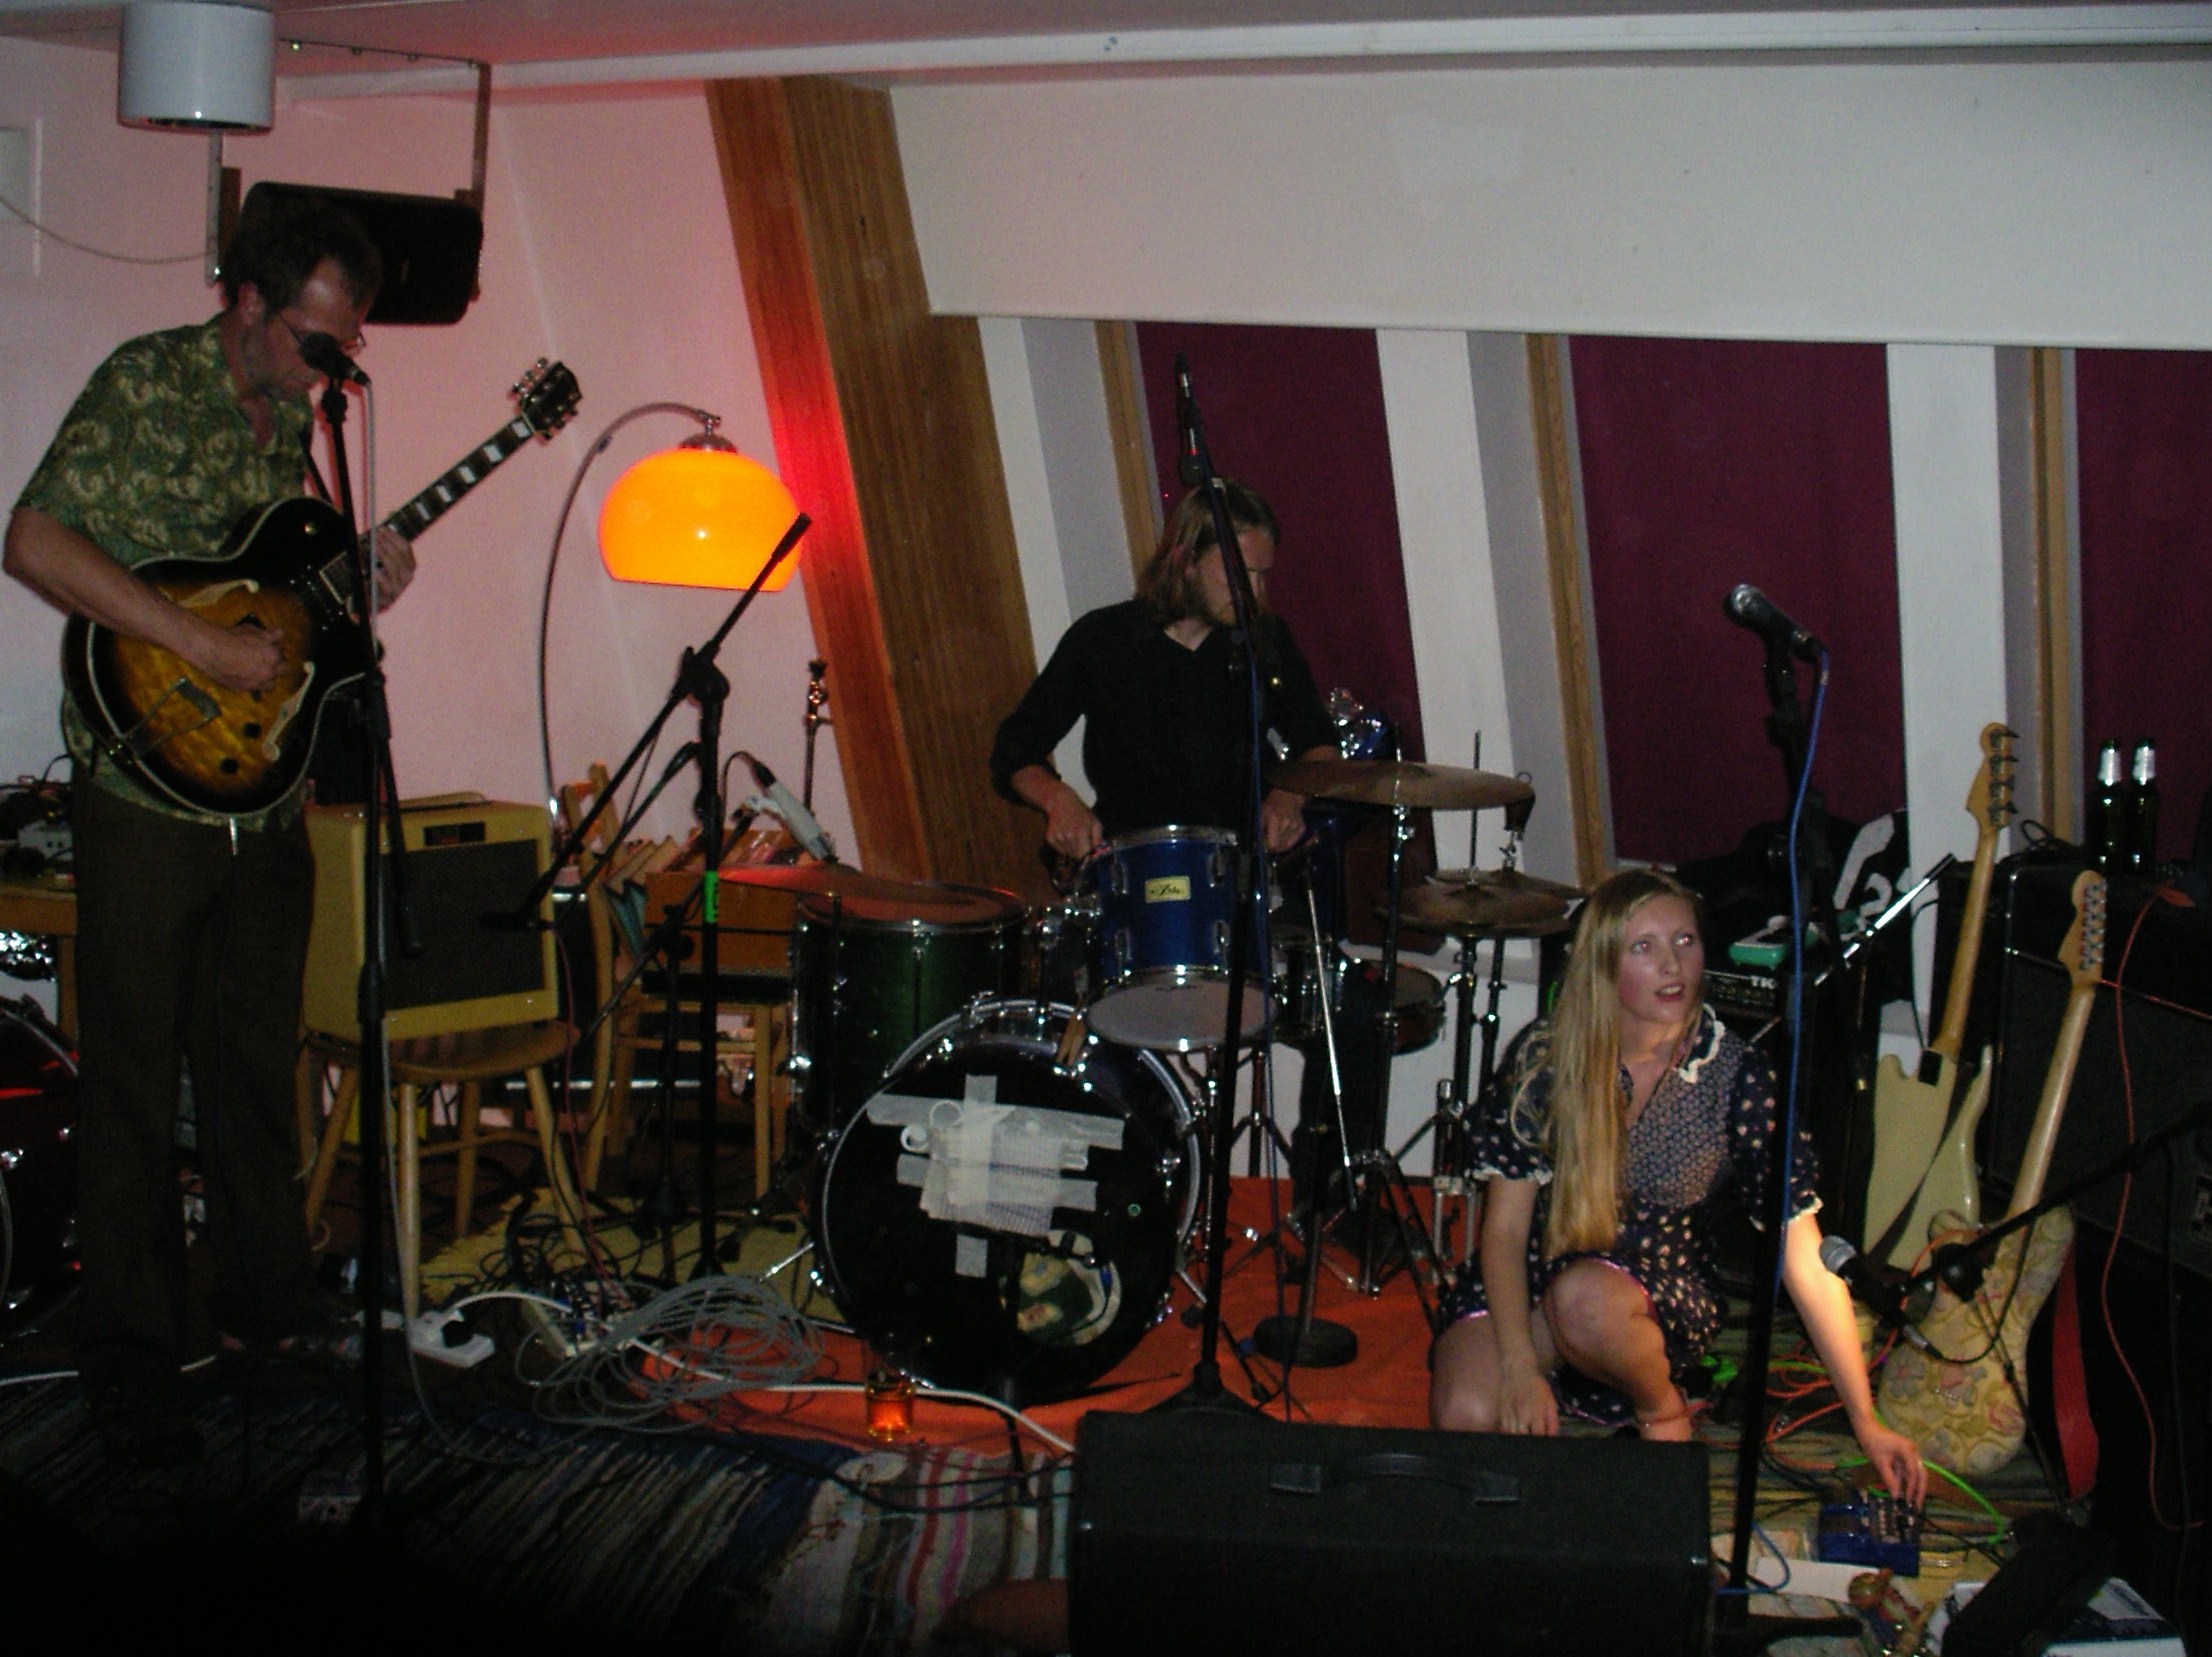 the musician and band are performing in a small room